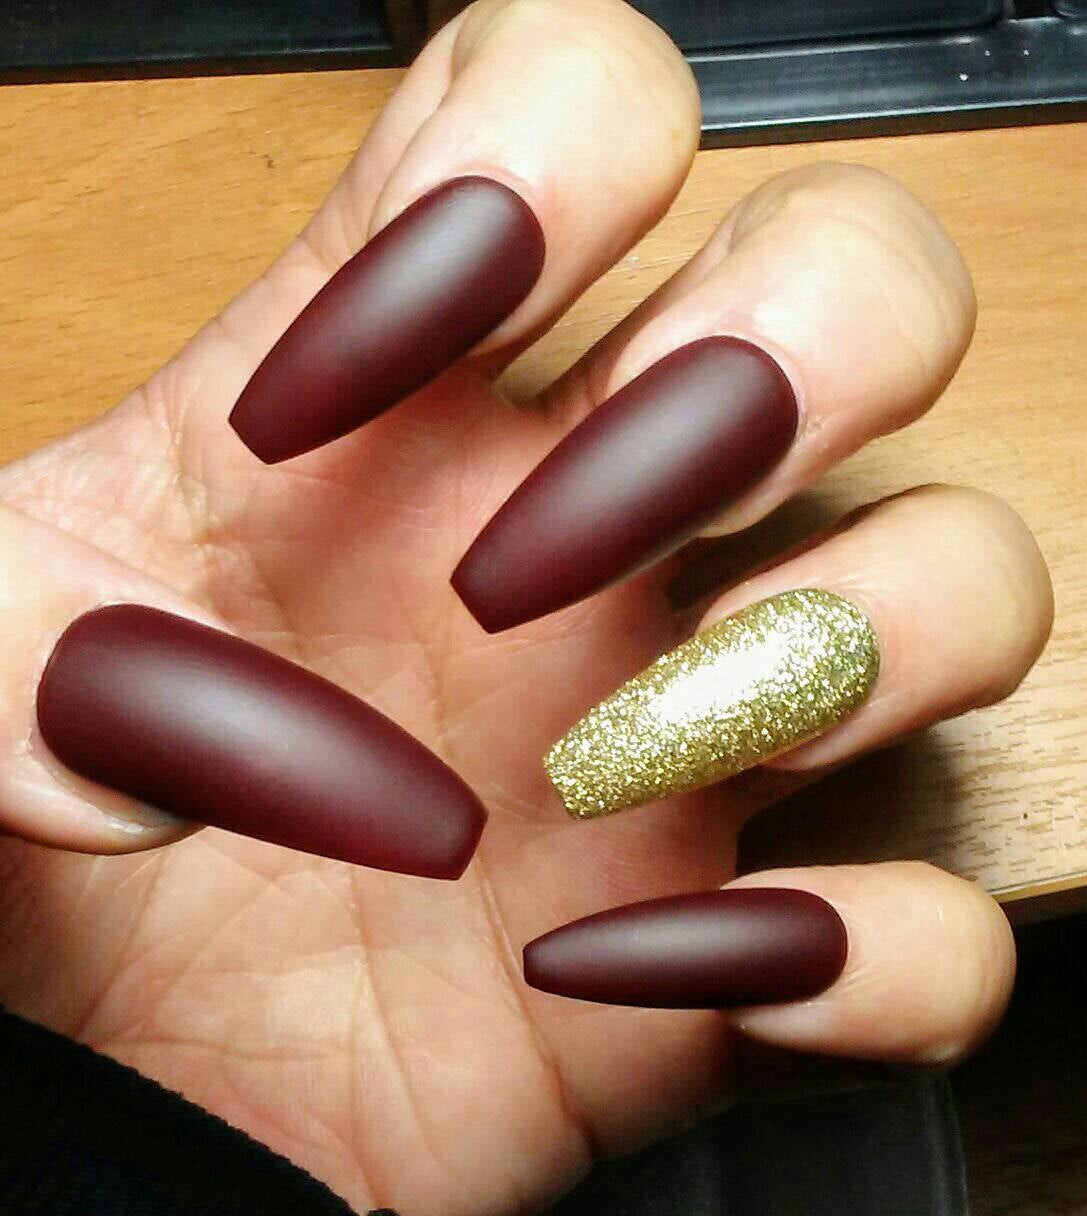 Glitter Coffin Nails
 Long Matte Coffin Nails Burgundy Maroon & Gold Glitter Red